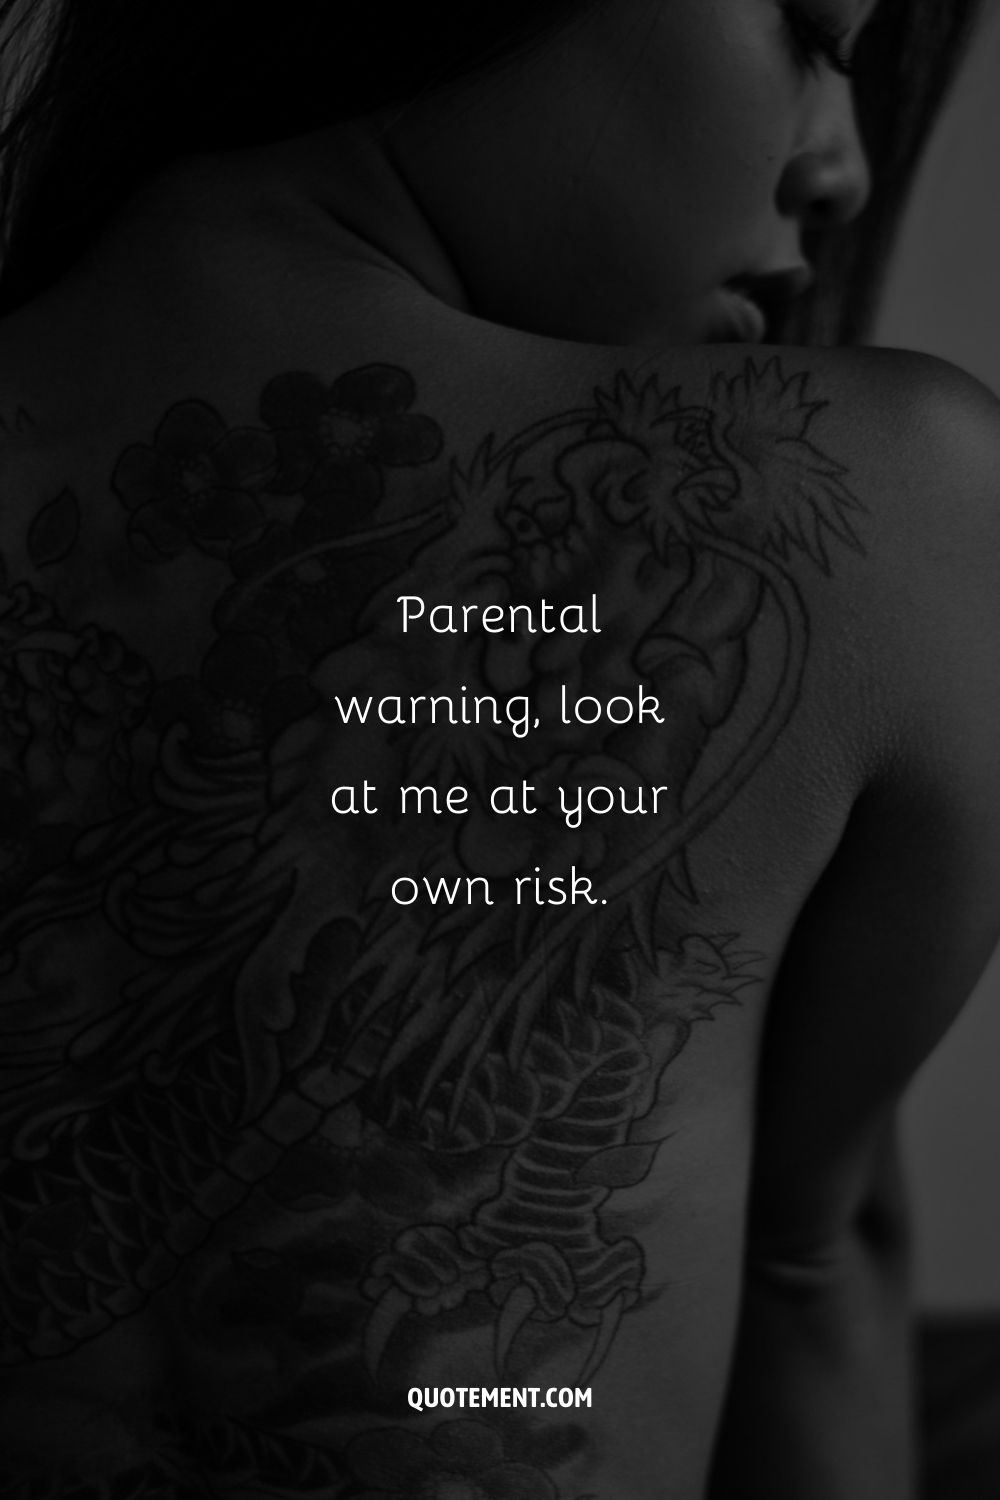 Image of a woman with a back tattoo representing a nude caption.